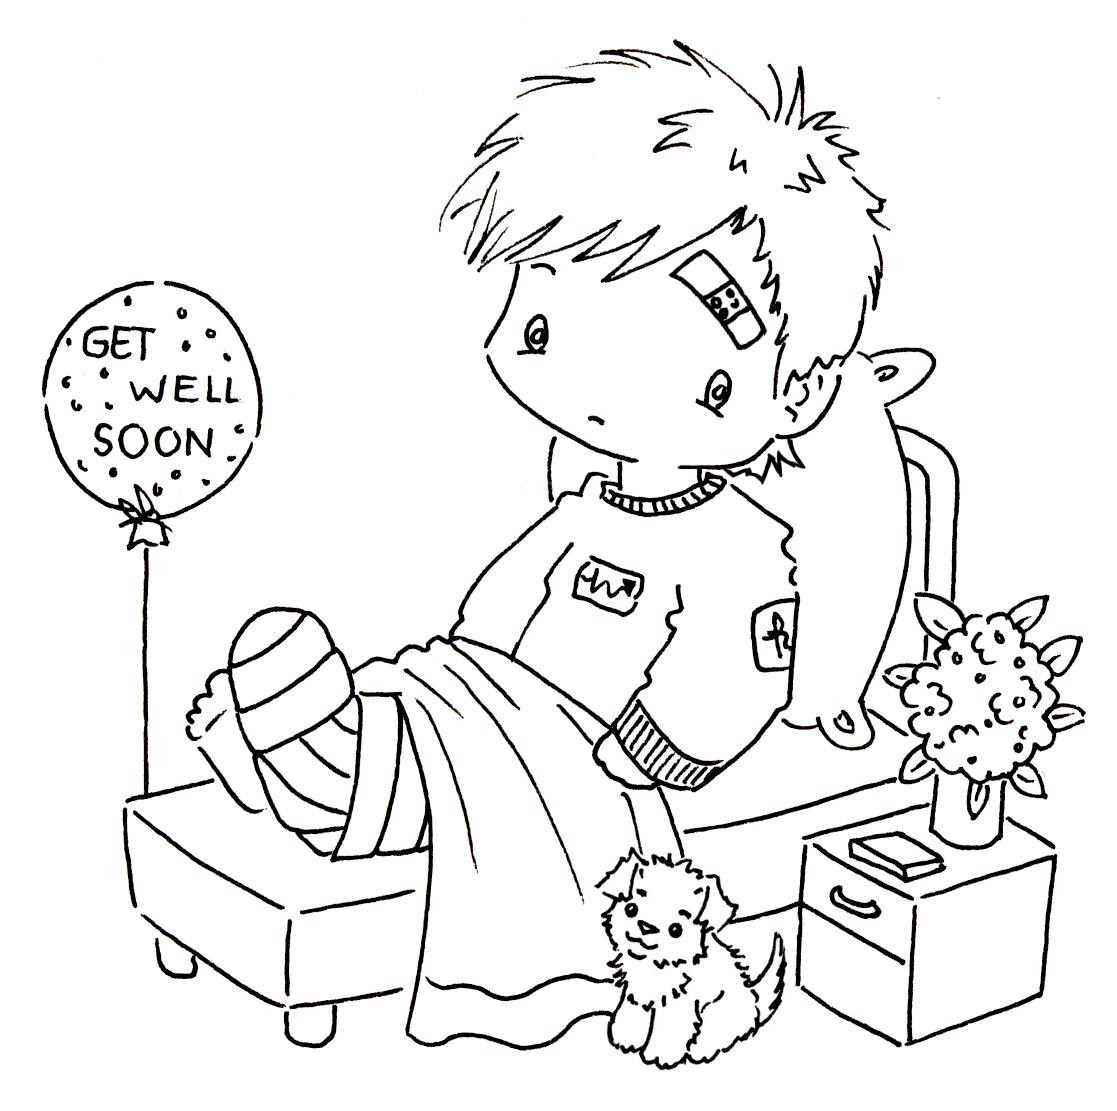 Get Well Soon Coloring Pages
 Men and boys digi stamps on Pinterest